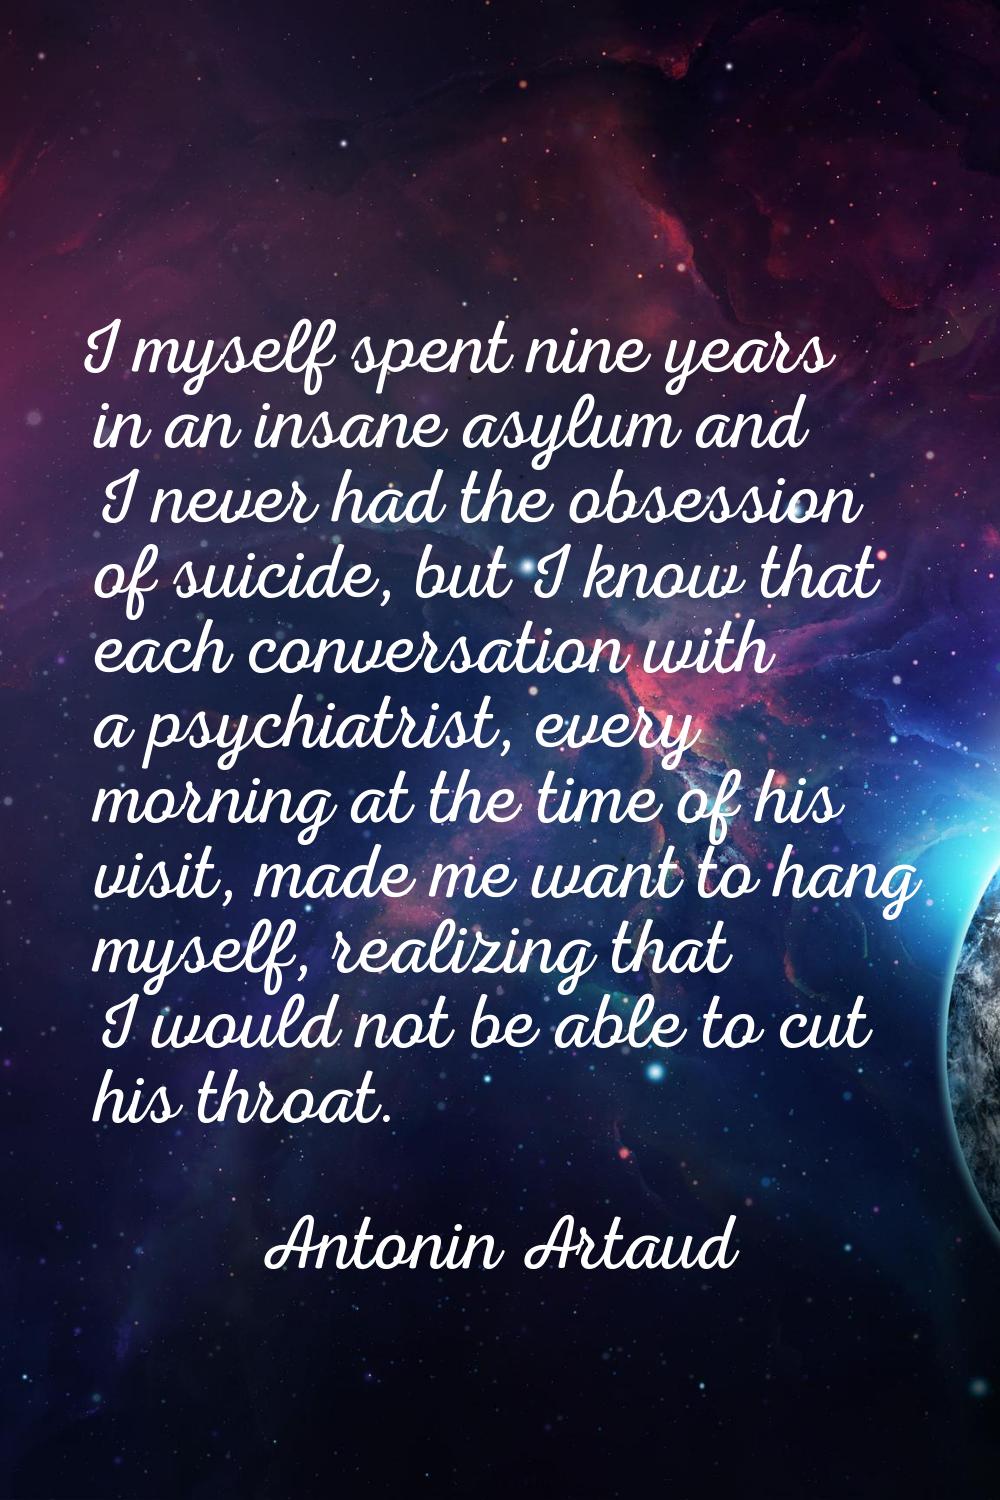 I myself spent nine years in an insane asylum and I never had the obsession of suicide, but I know 